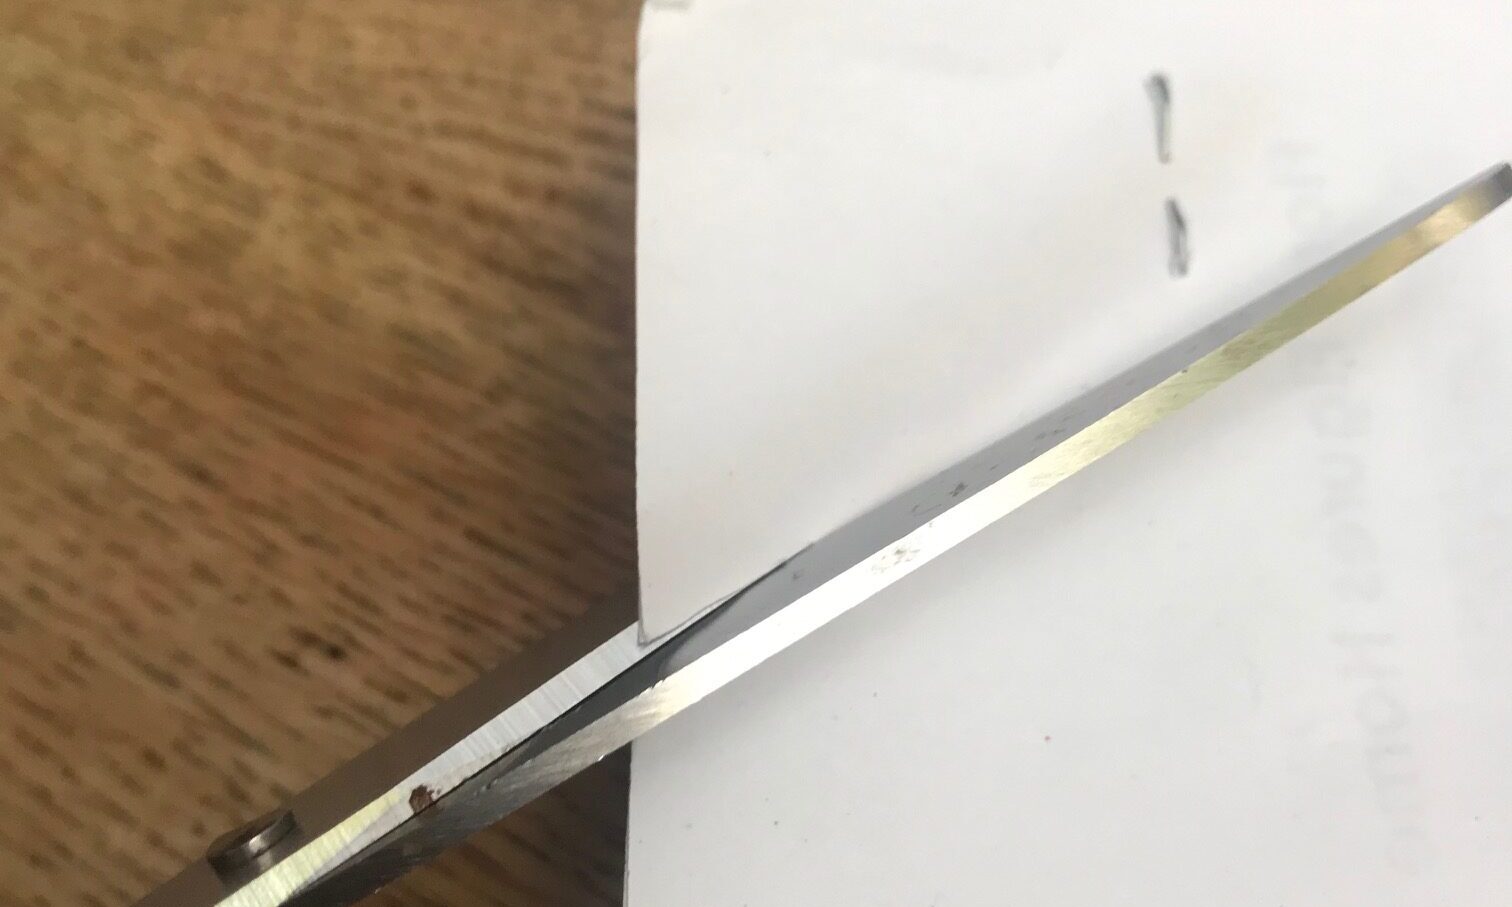 photo of scissors cutting the corner of a piece of white paper